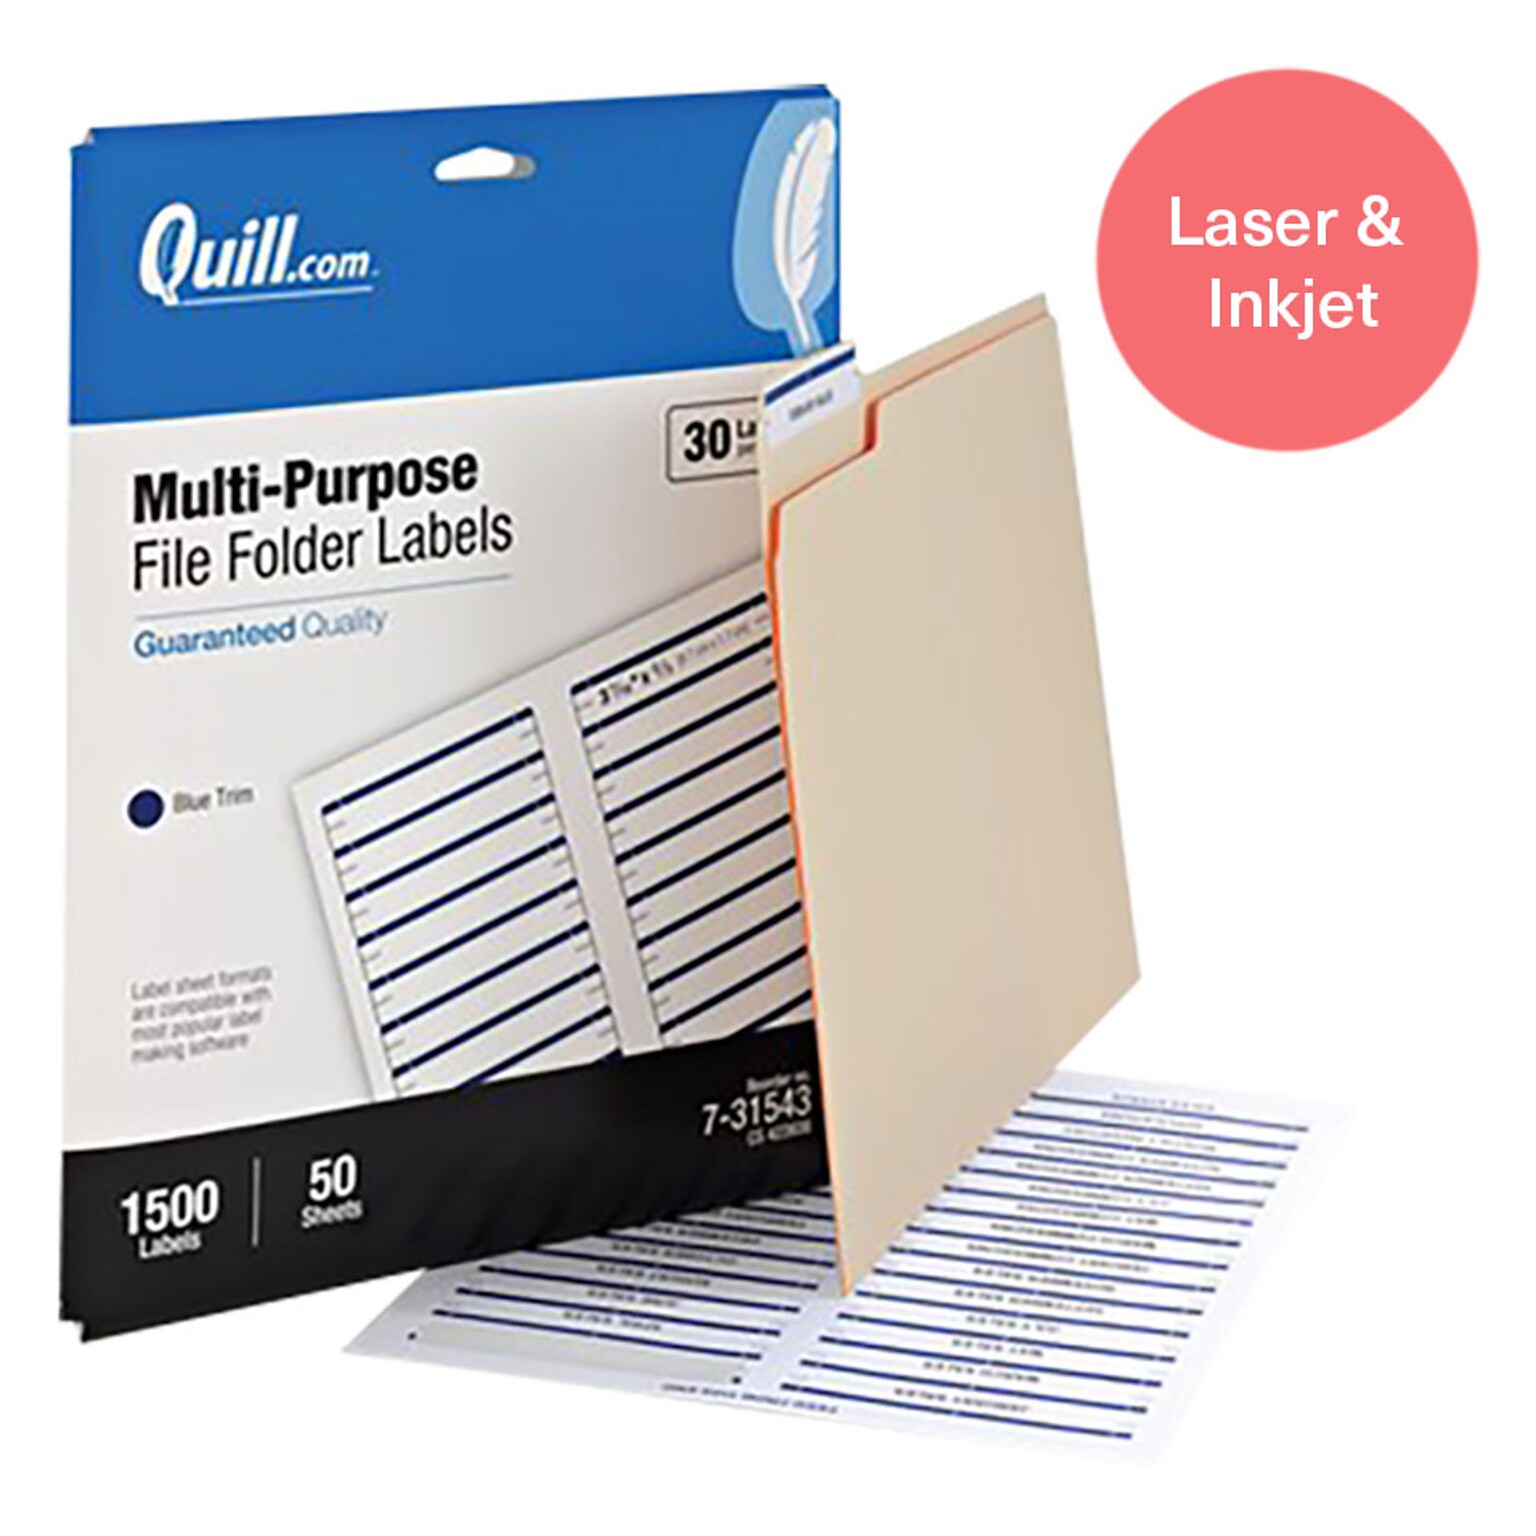 Quill Brand® Laser/Inkjet File Folder Labels, 2/3 x 3-7/16, Blue, 1,500 Labels (Comparable to Avery 5766)